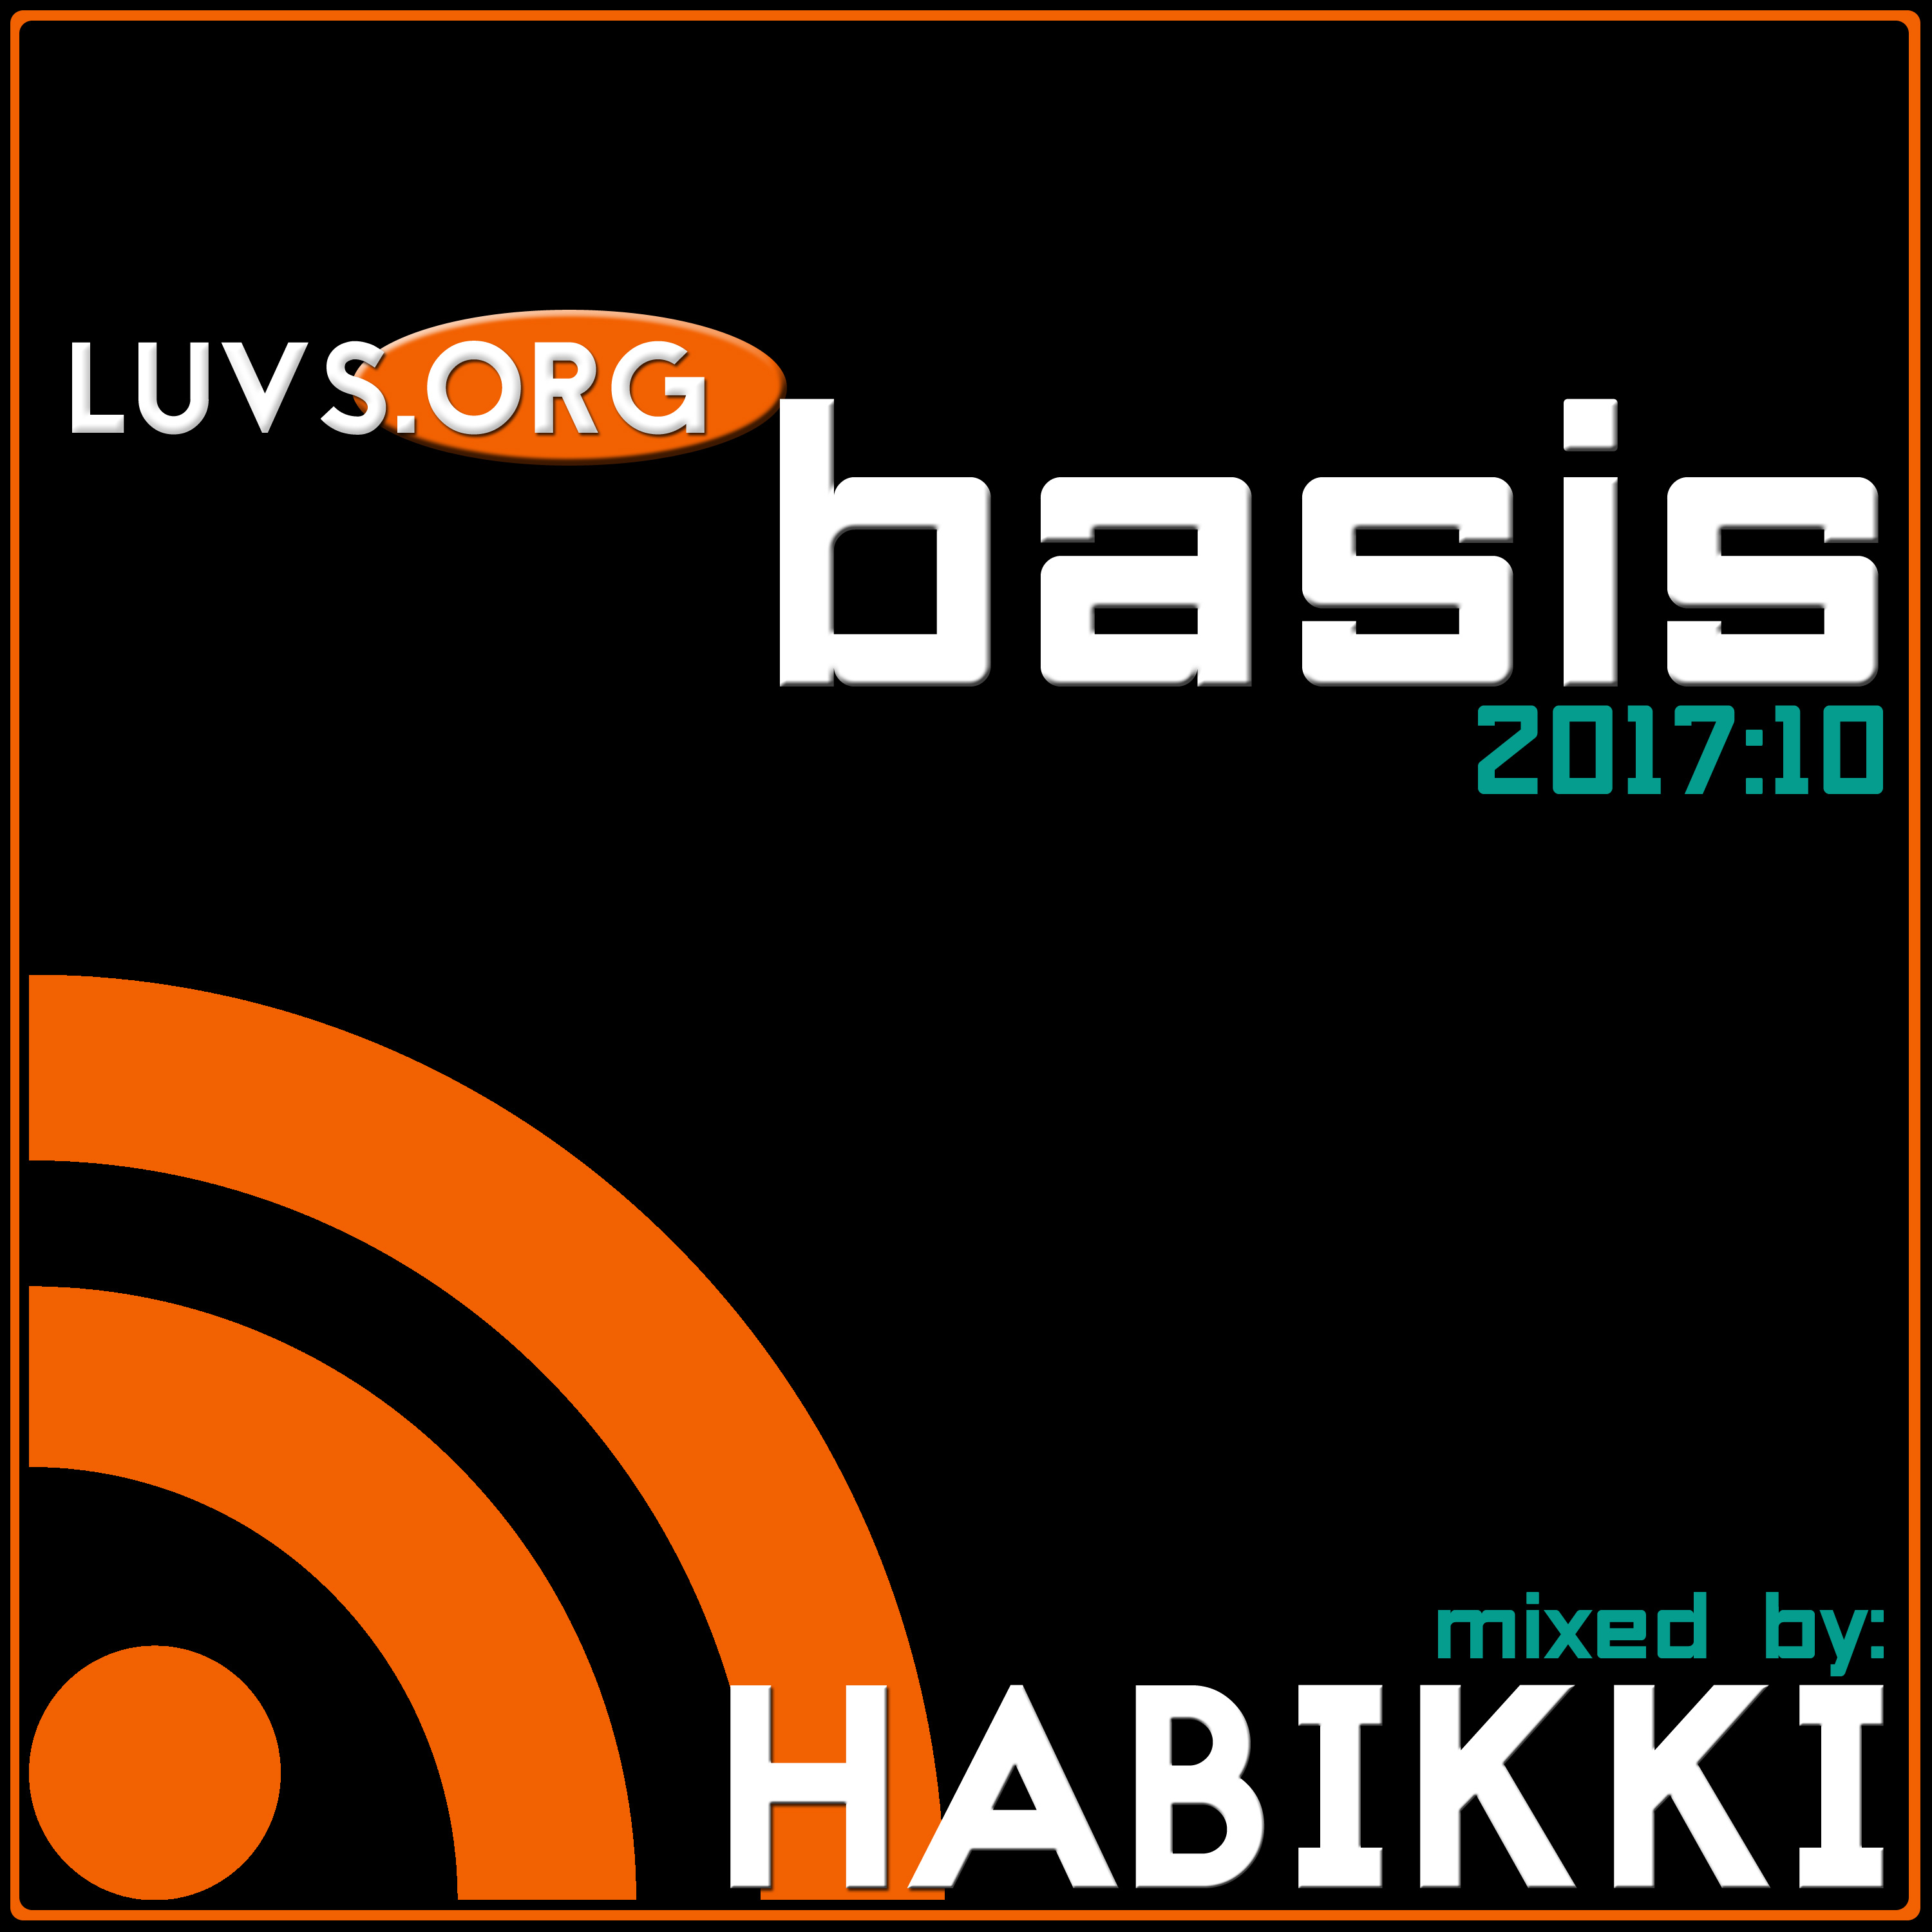 Luvs.org Sessions: [2017:10] Basis